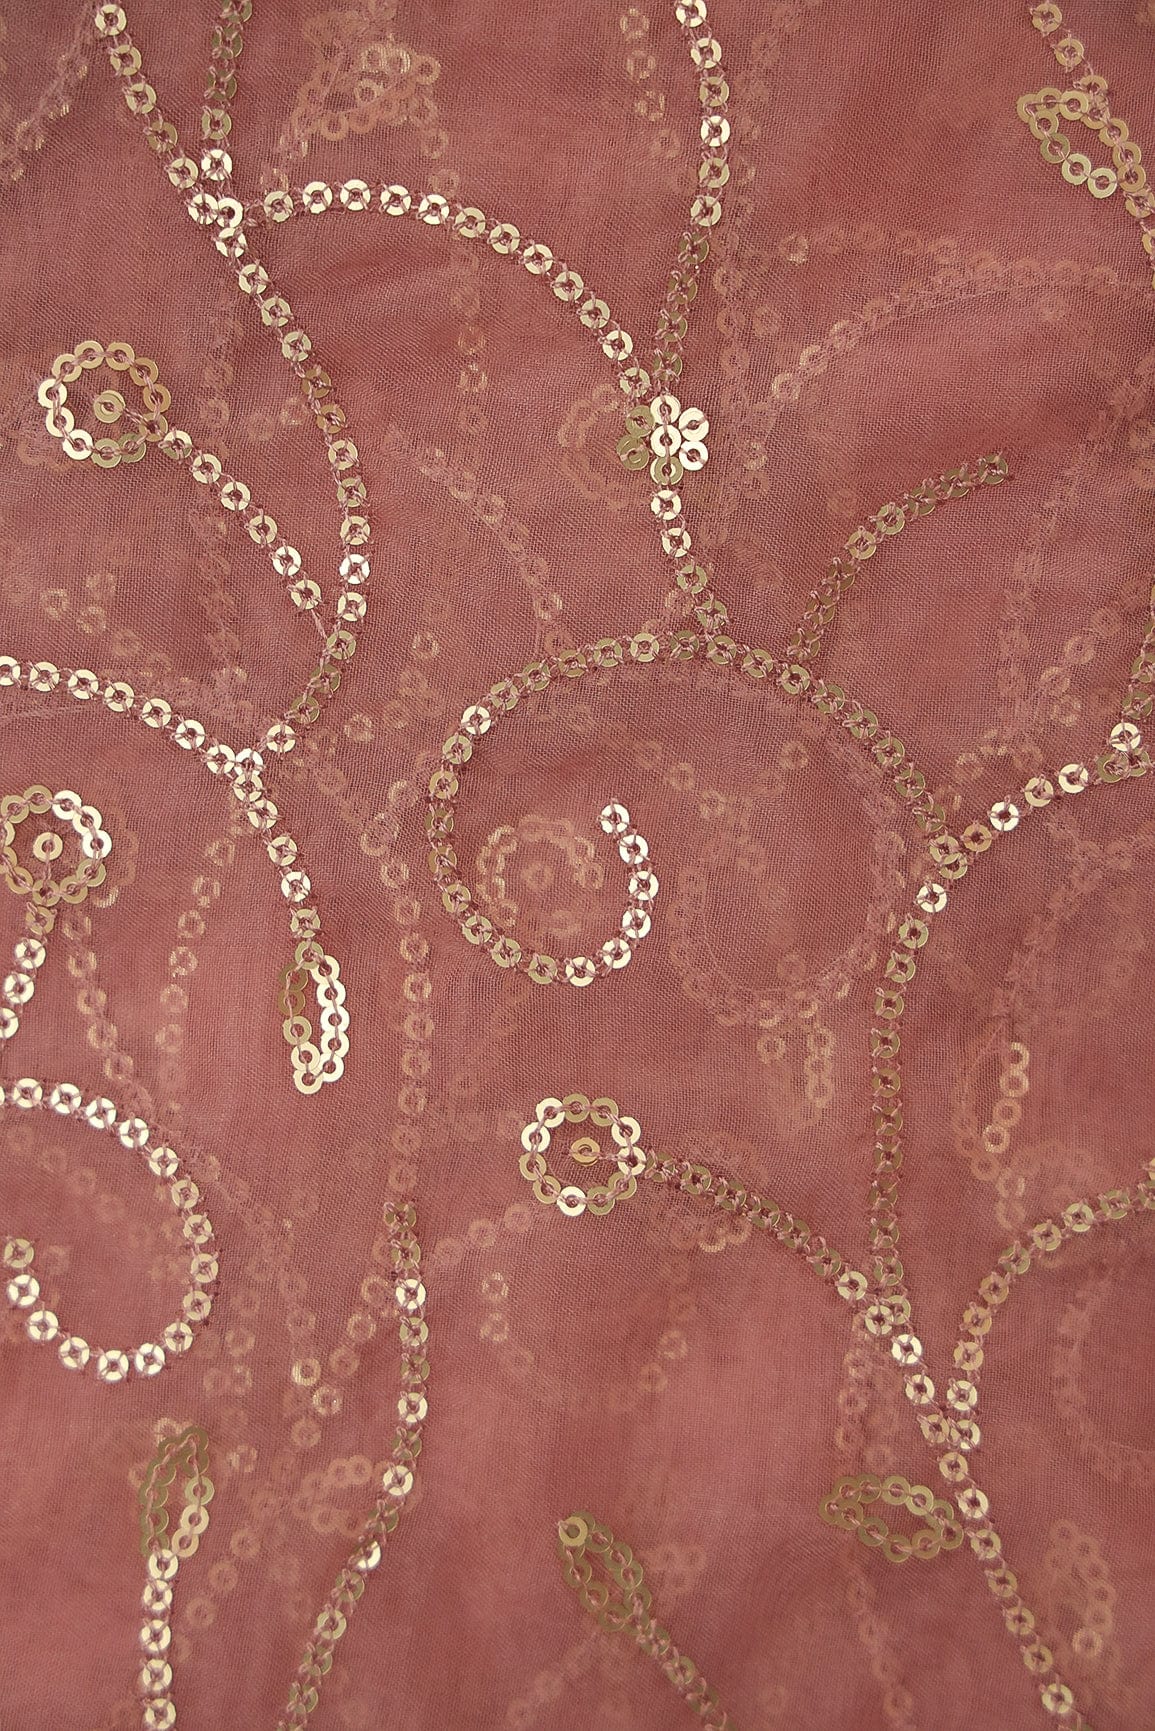 doeraa Embroidery Fabrics Cultural Gold Sequins Embroidery on Salmon Pink Organza Fabric